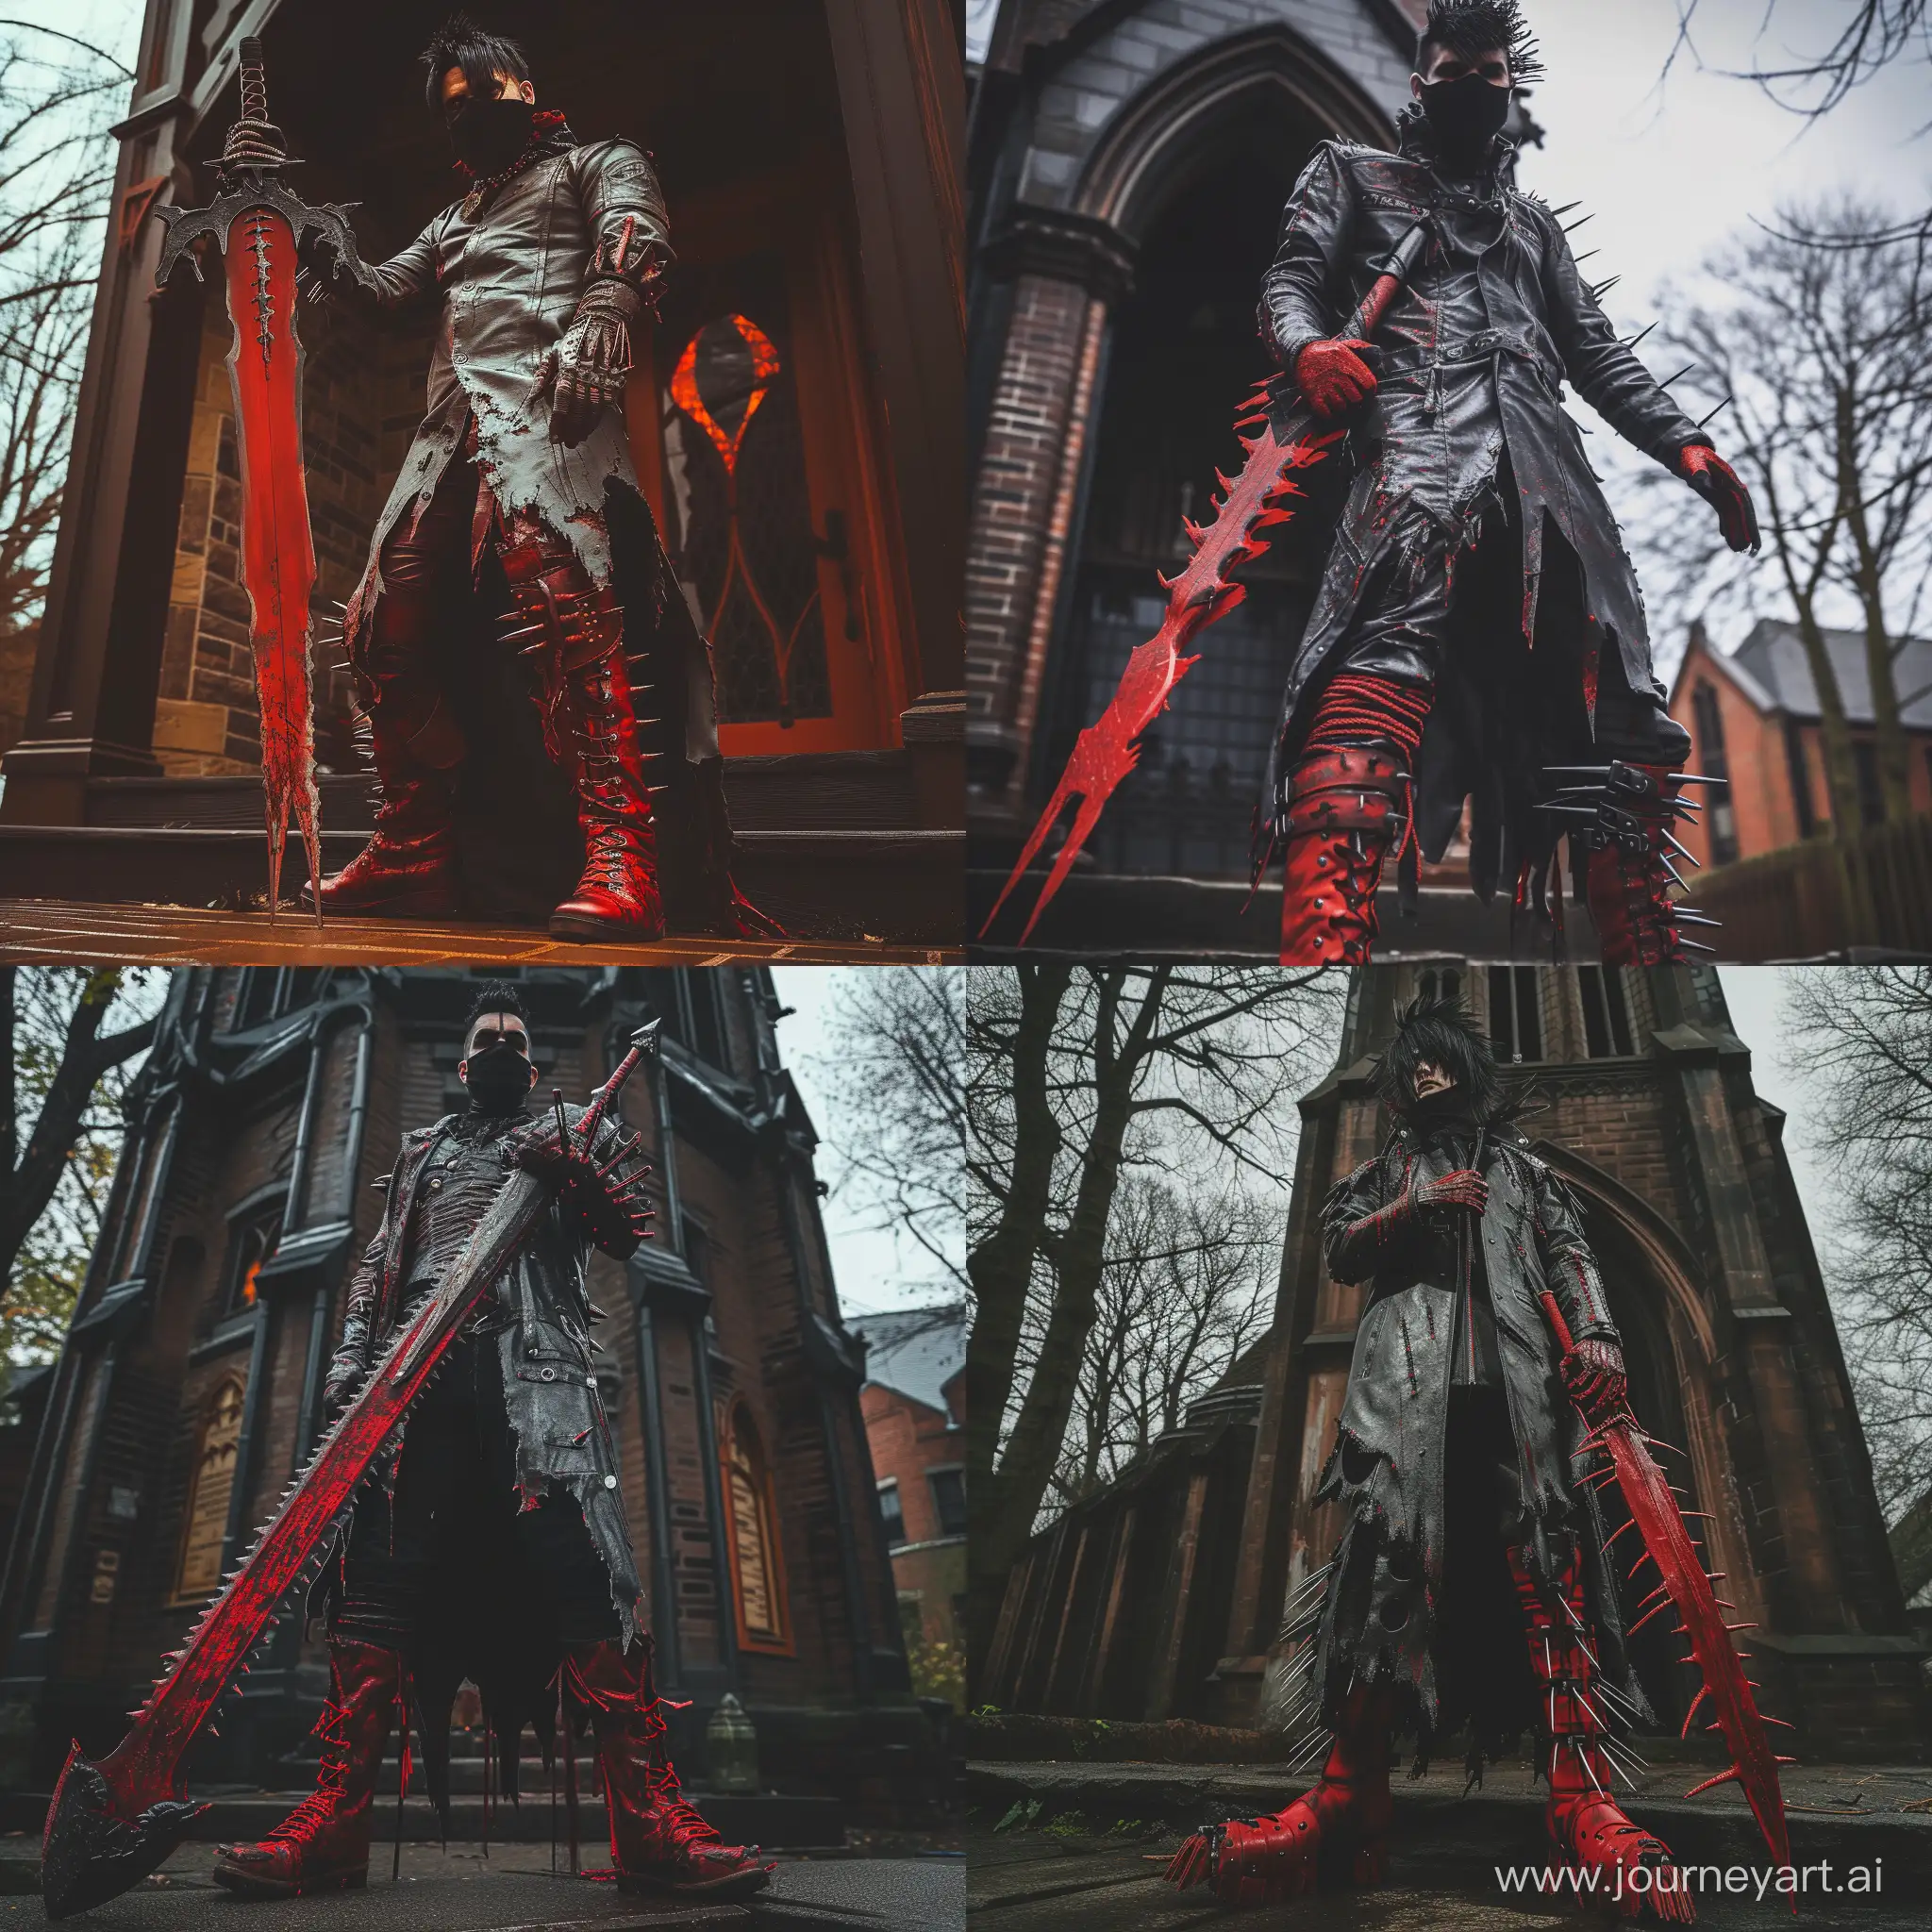 Sinister-Bloodborne-Warrior-Stands-Guard-Outside-Gothic-Church-with-Colossal-Red-Sword